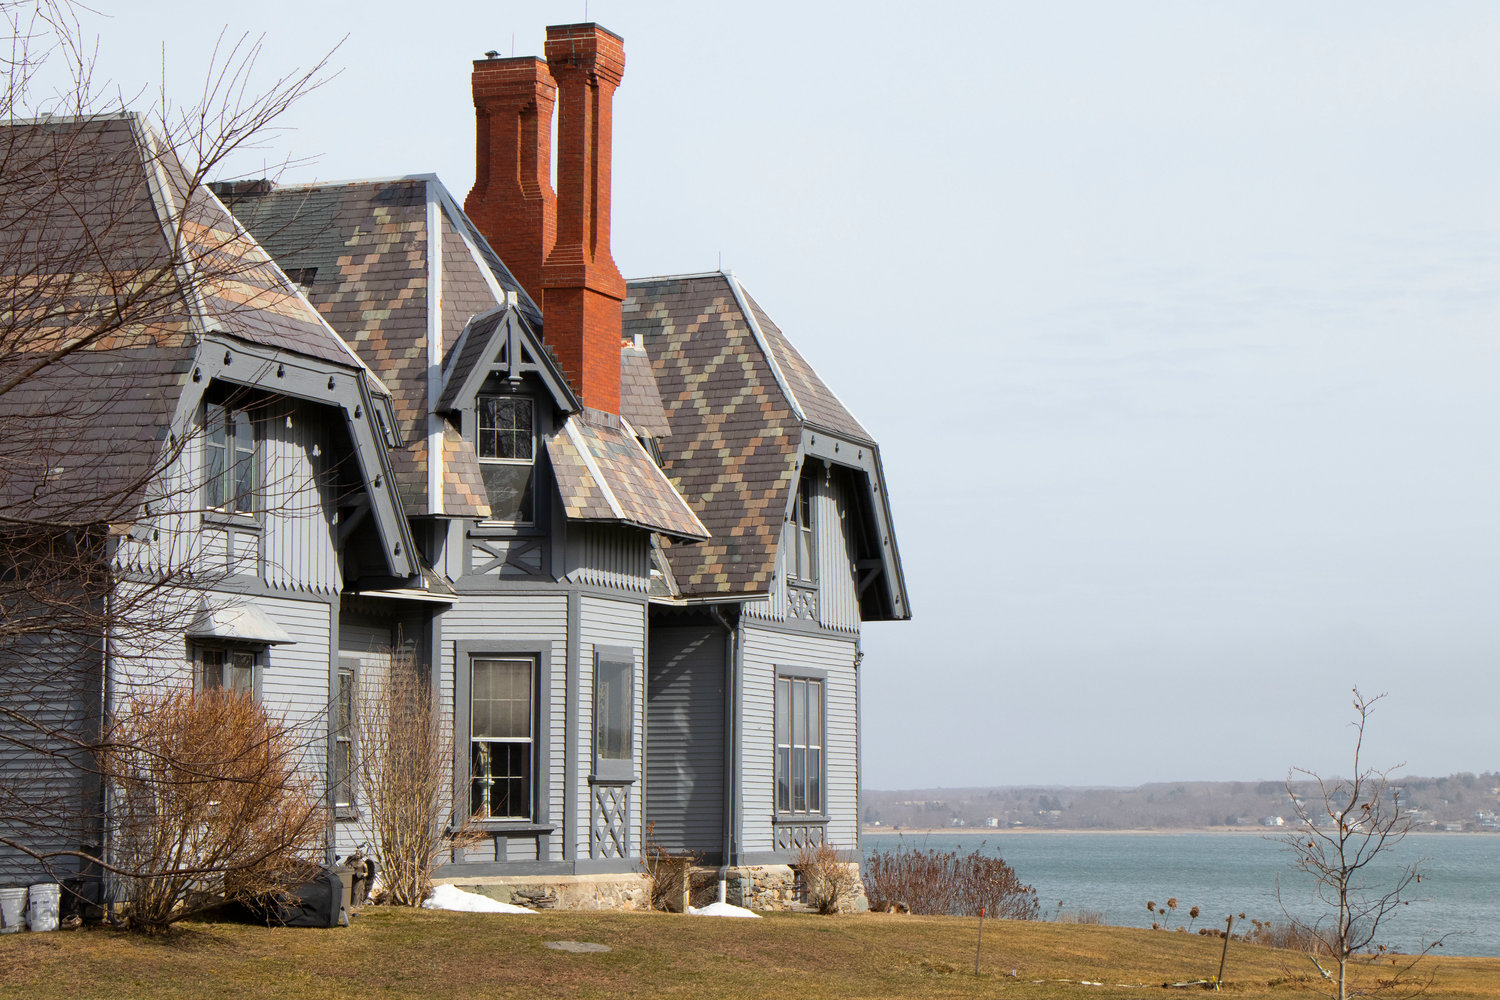 The Wilsons’ home has an expansive view of the Sakonnet River. The property is listed on the National Register of Historic Places. David Chase, former deputy director of the Rhode Island Historical Preservation Commission, described the house as “an important example of mid-19th-century Gothicism ... that deserves commendation as a fine design.” 